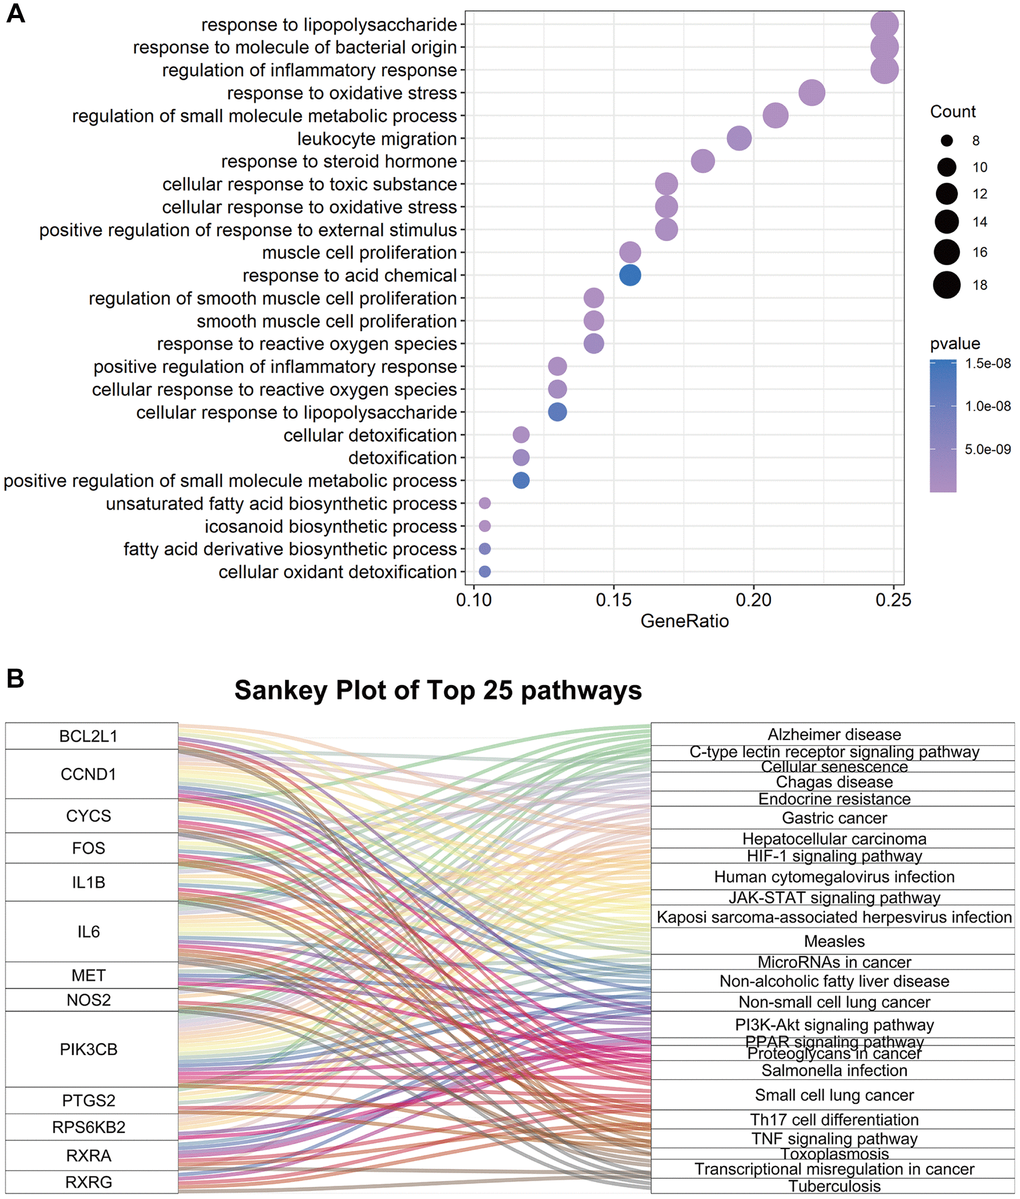 The enrichment results of 77 common genes between FTZ pharmacological target genes and osteoclast-related genes. (A) Top 25 terms of the biological process enrichment. (B) Sankey diagram for the top 25 KEGG enrichment terms, displayed the relationship between enriched genes and pathway terms.